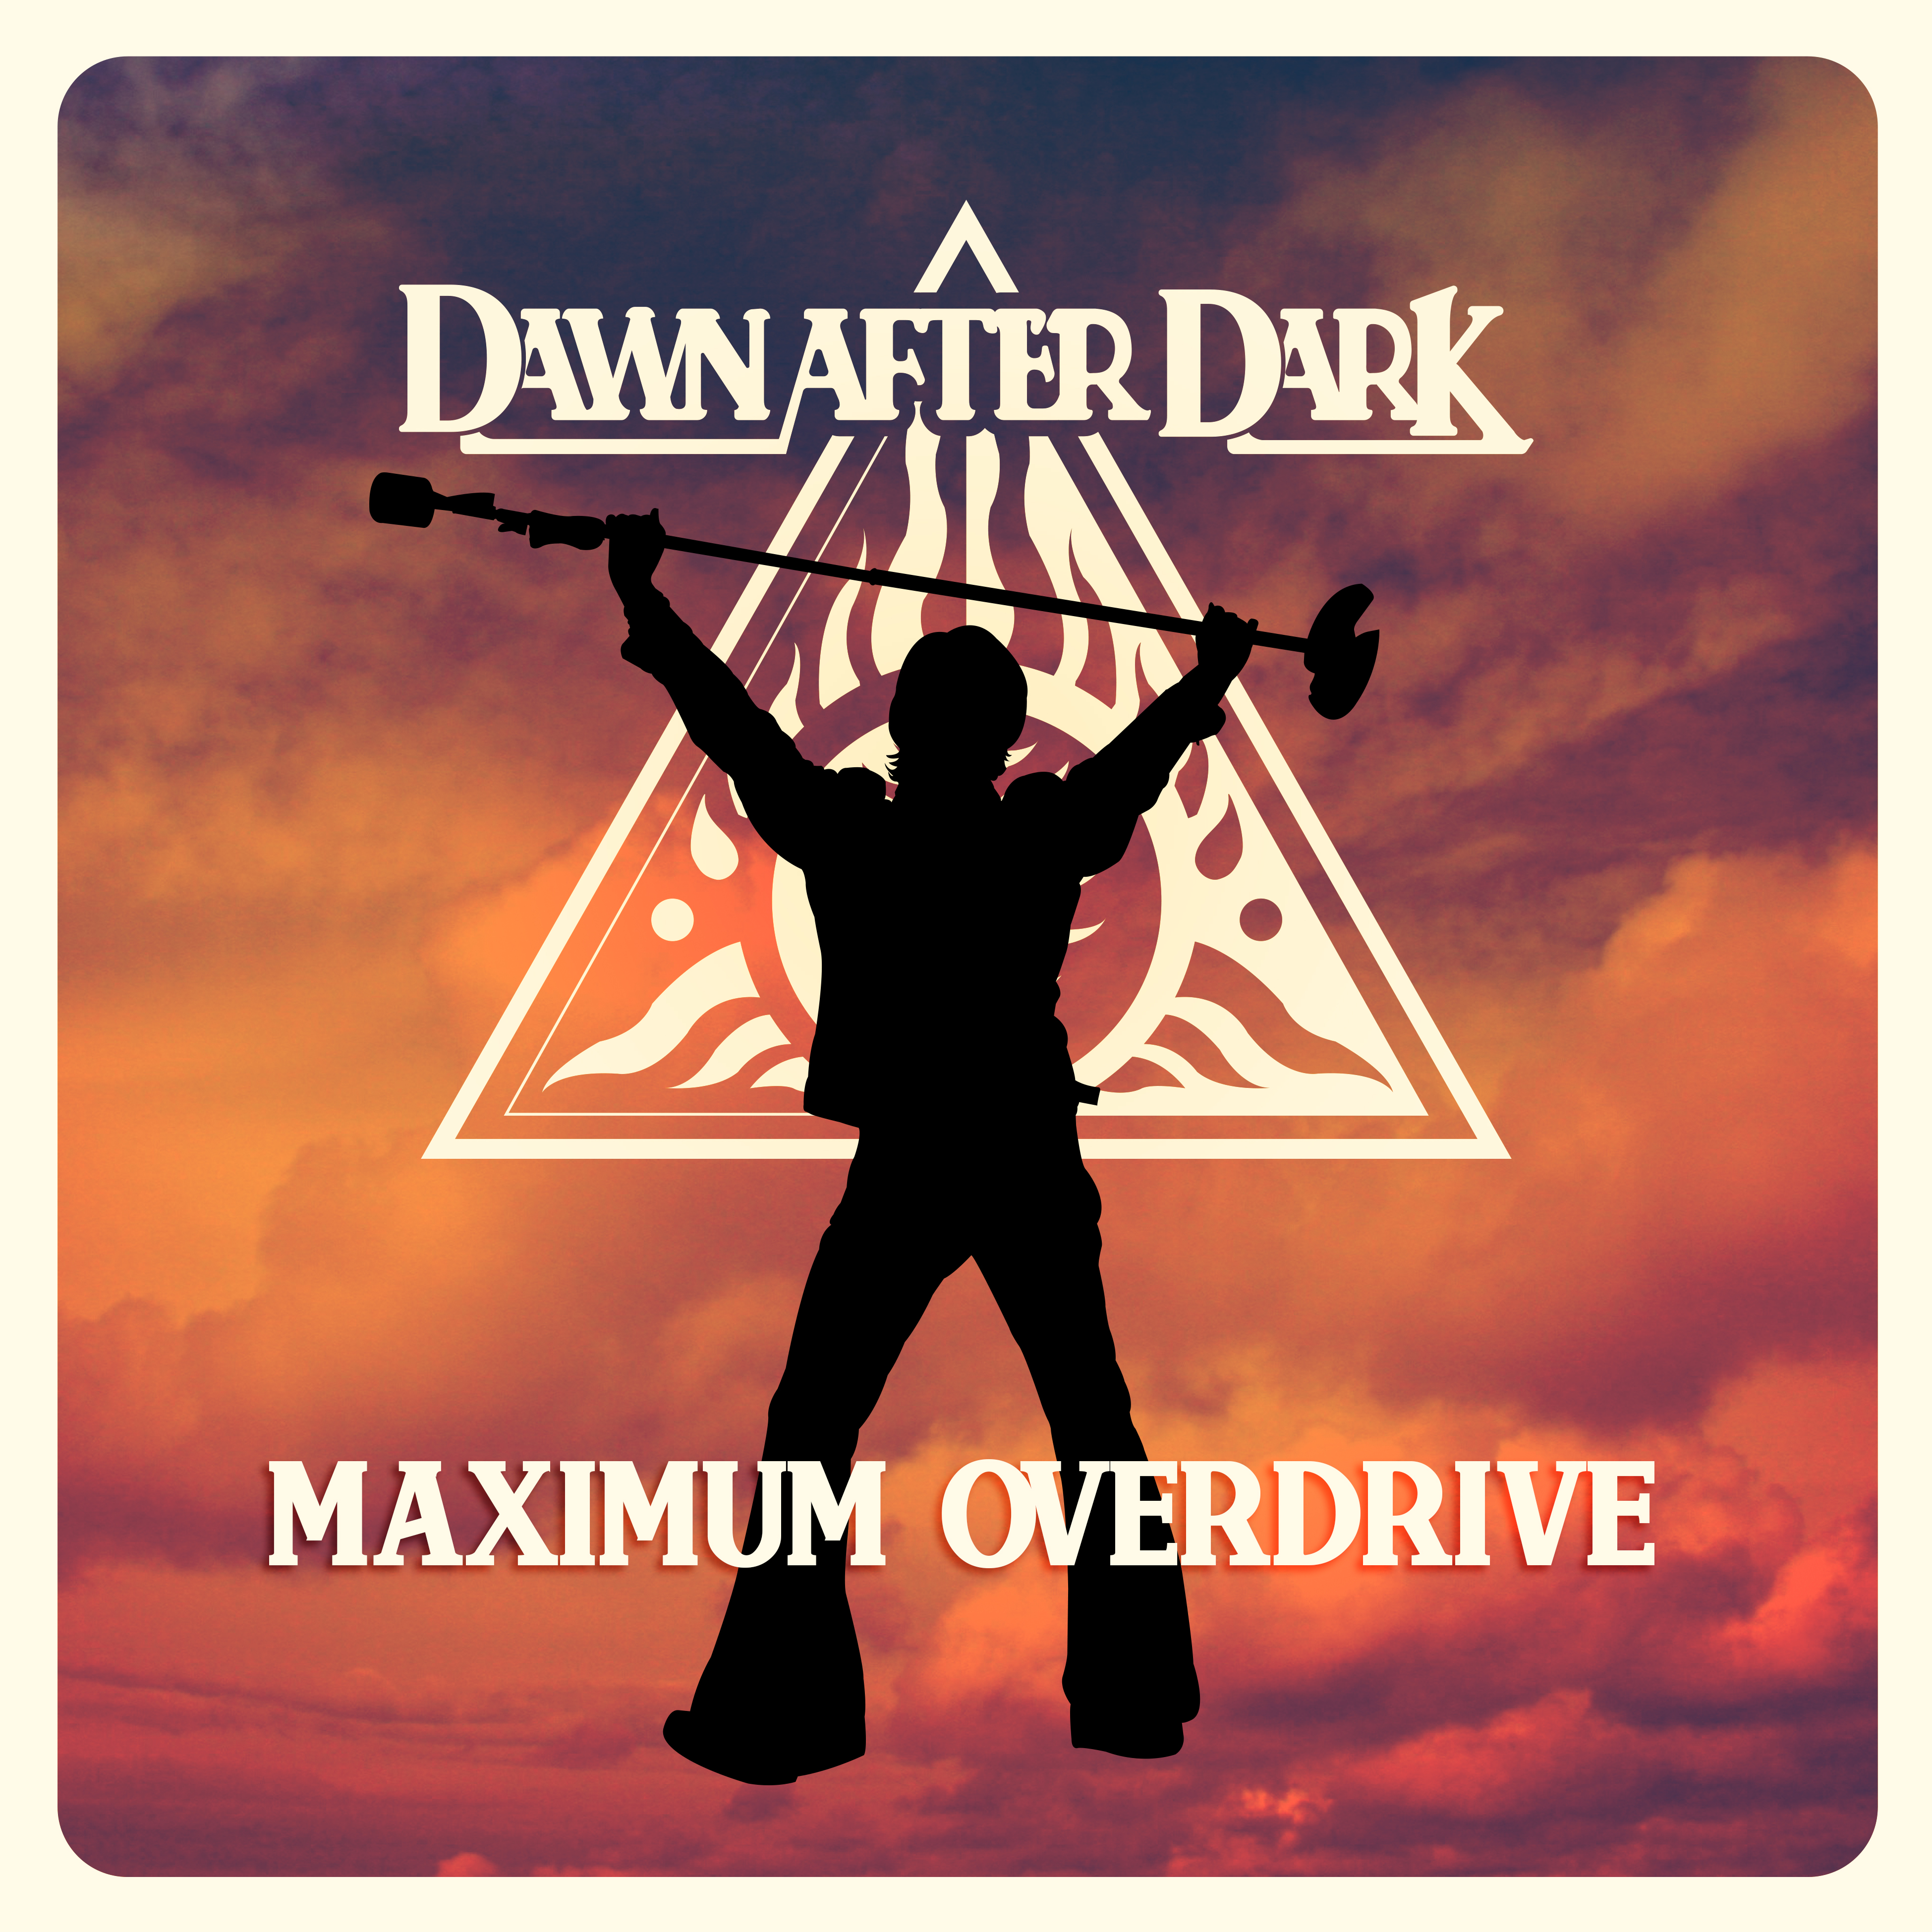 DAWN AFTER DARK RELEASE  ‘MAXIMUM OVERDRIVE’ - BRAND NEW SINGLE AND VIDEO.